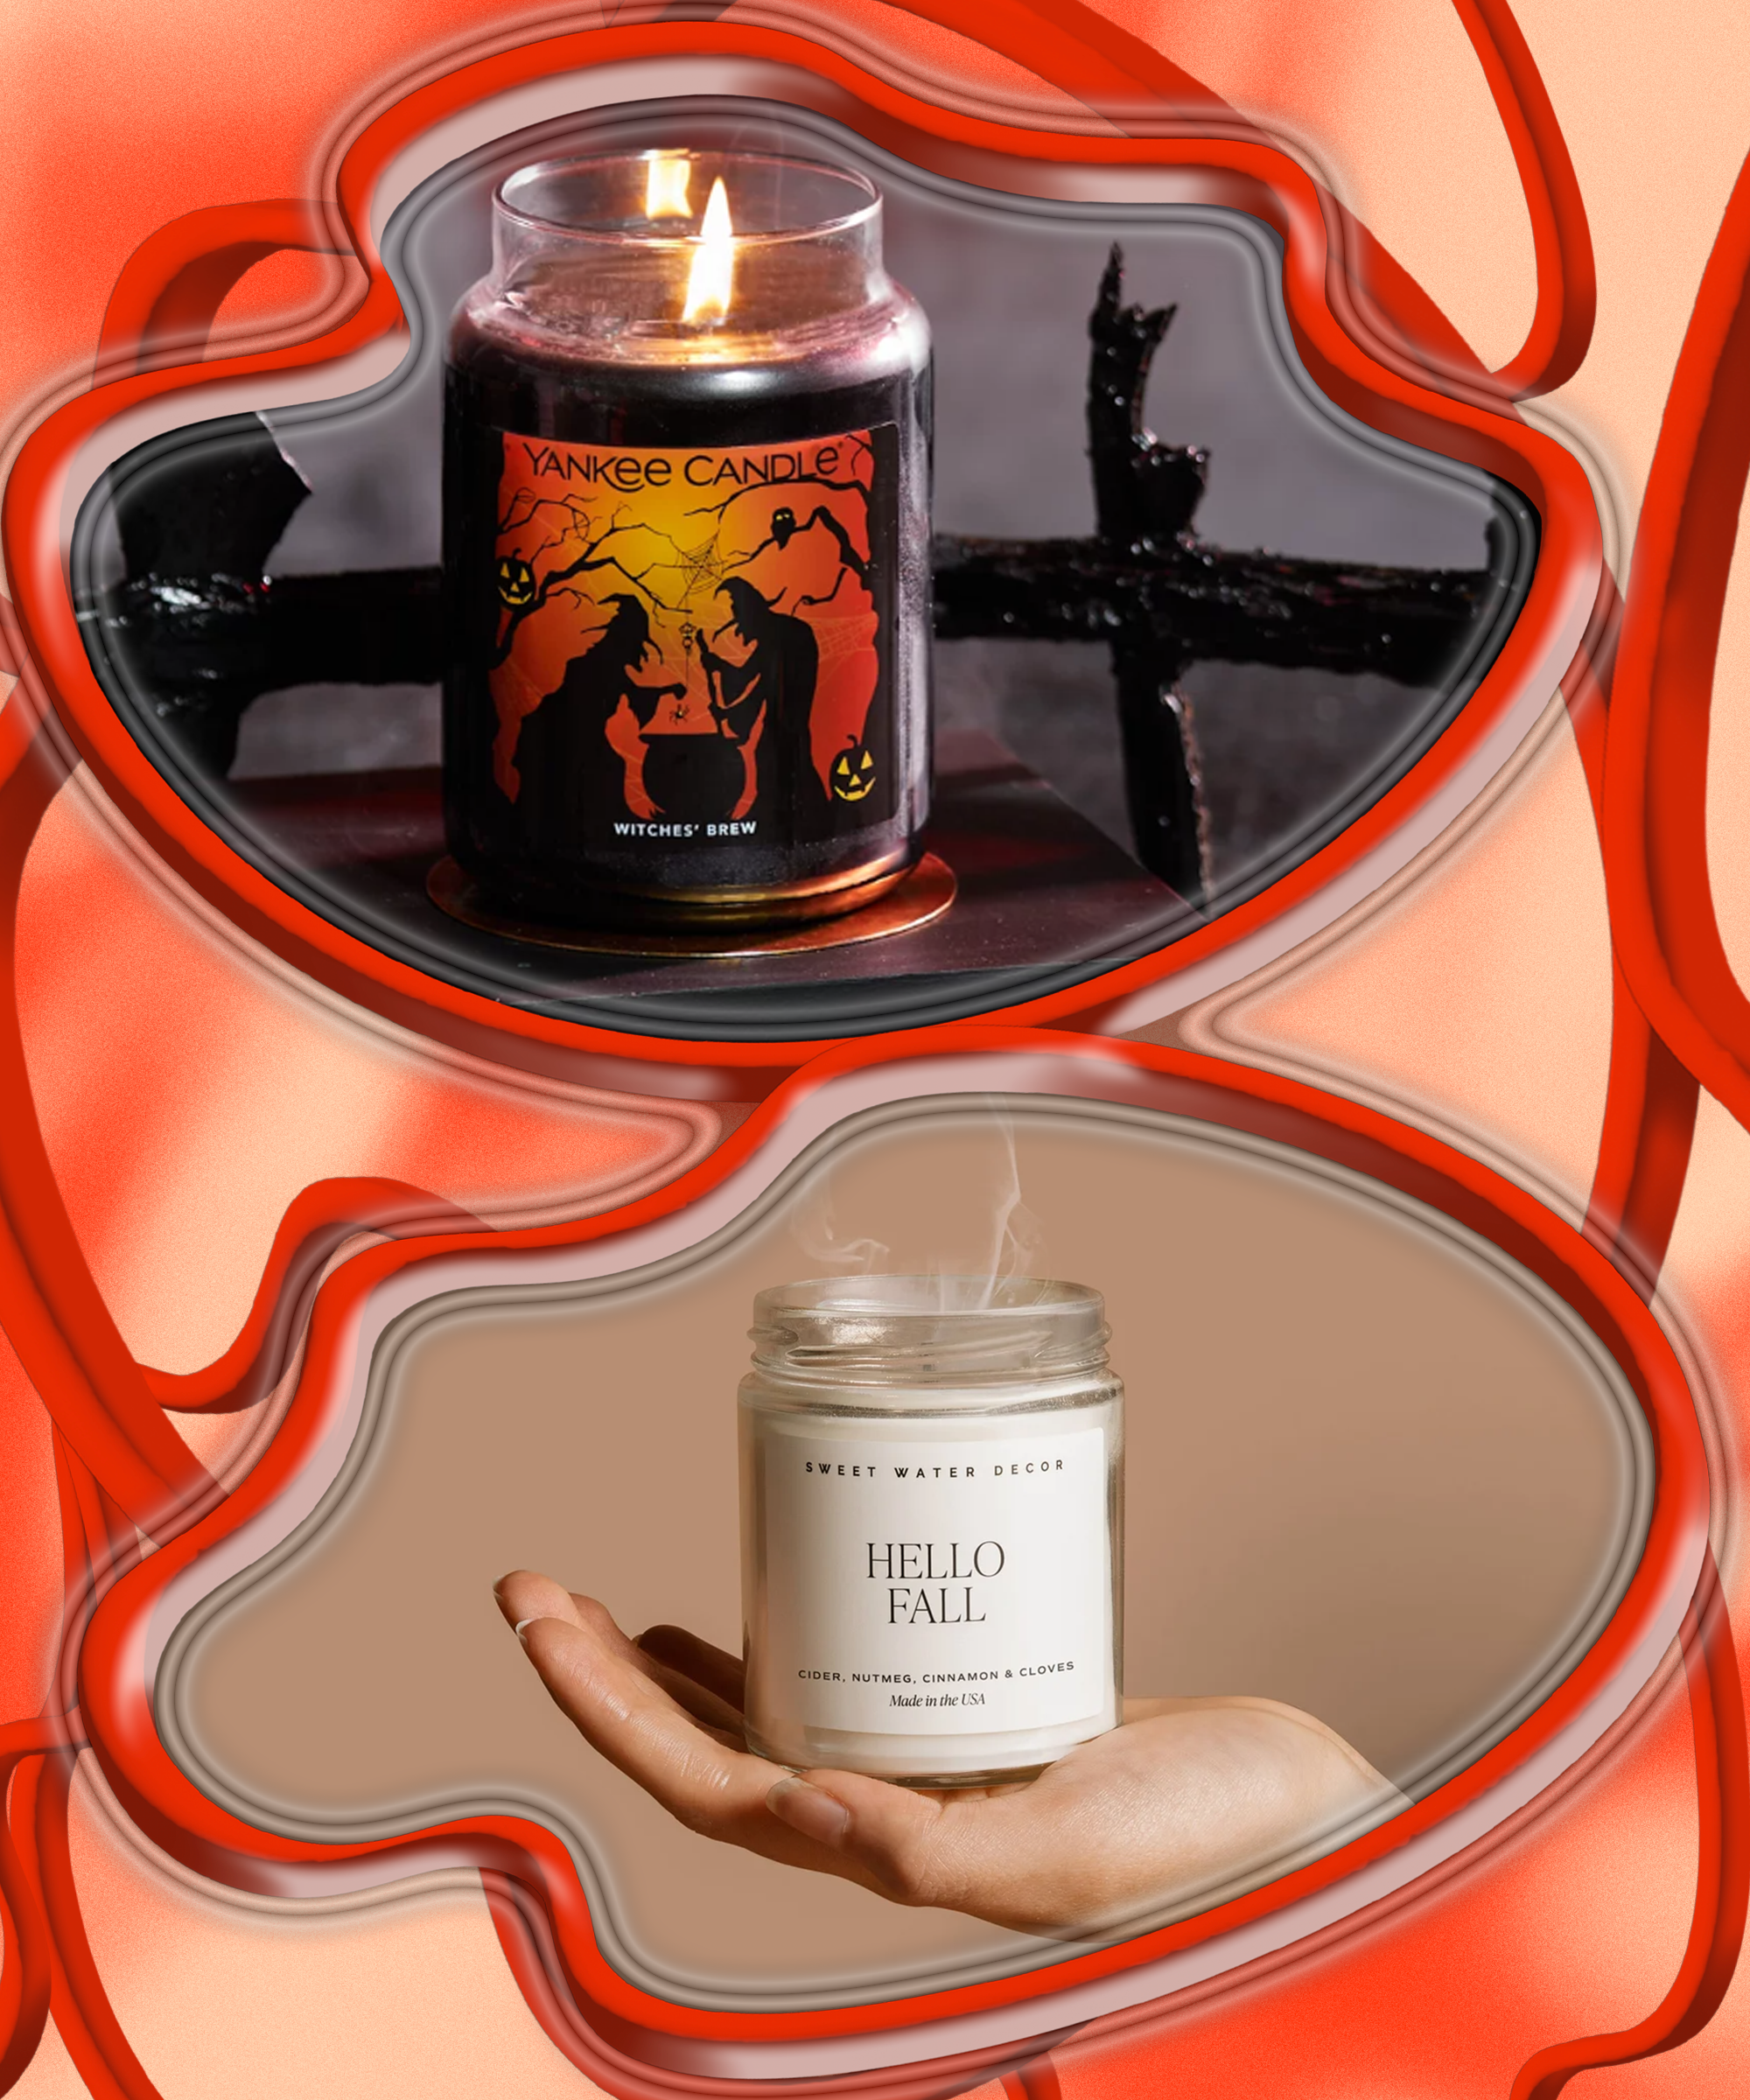 20 Fireplace Candles That Smell Like The Real Deal